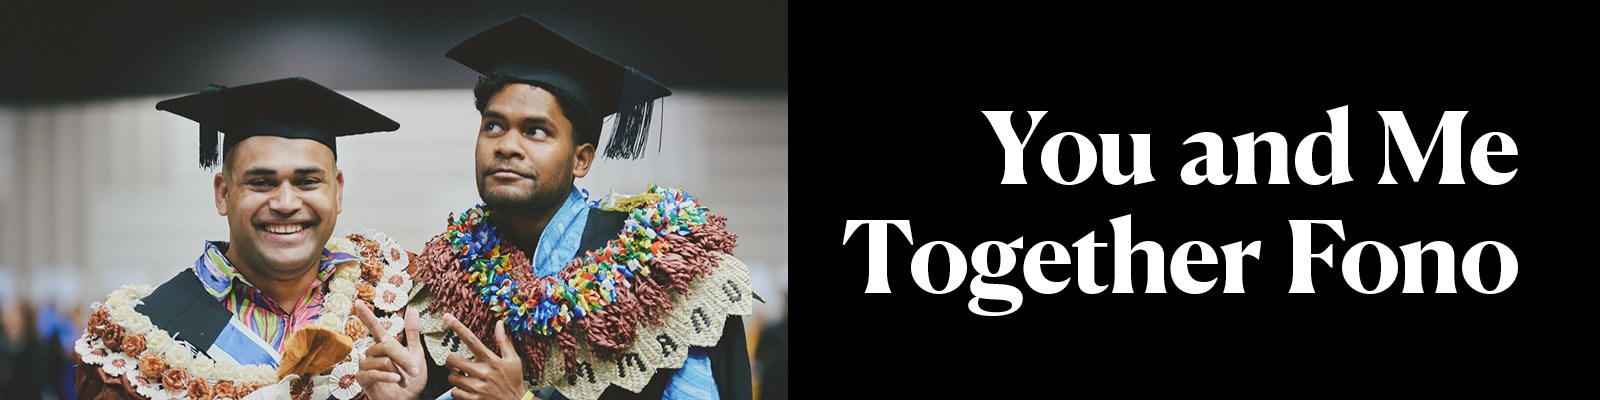 Graduating Pacific students, You and Me Together Fono event